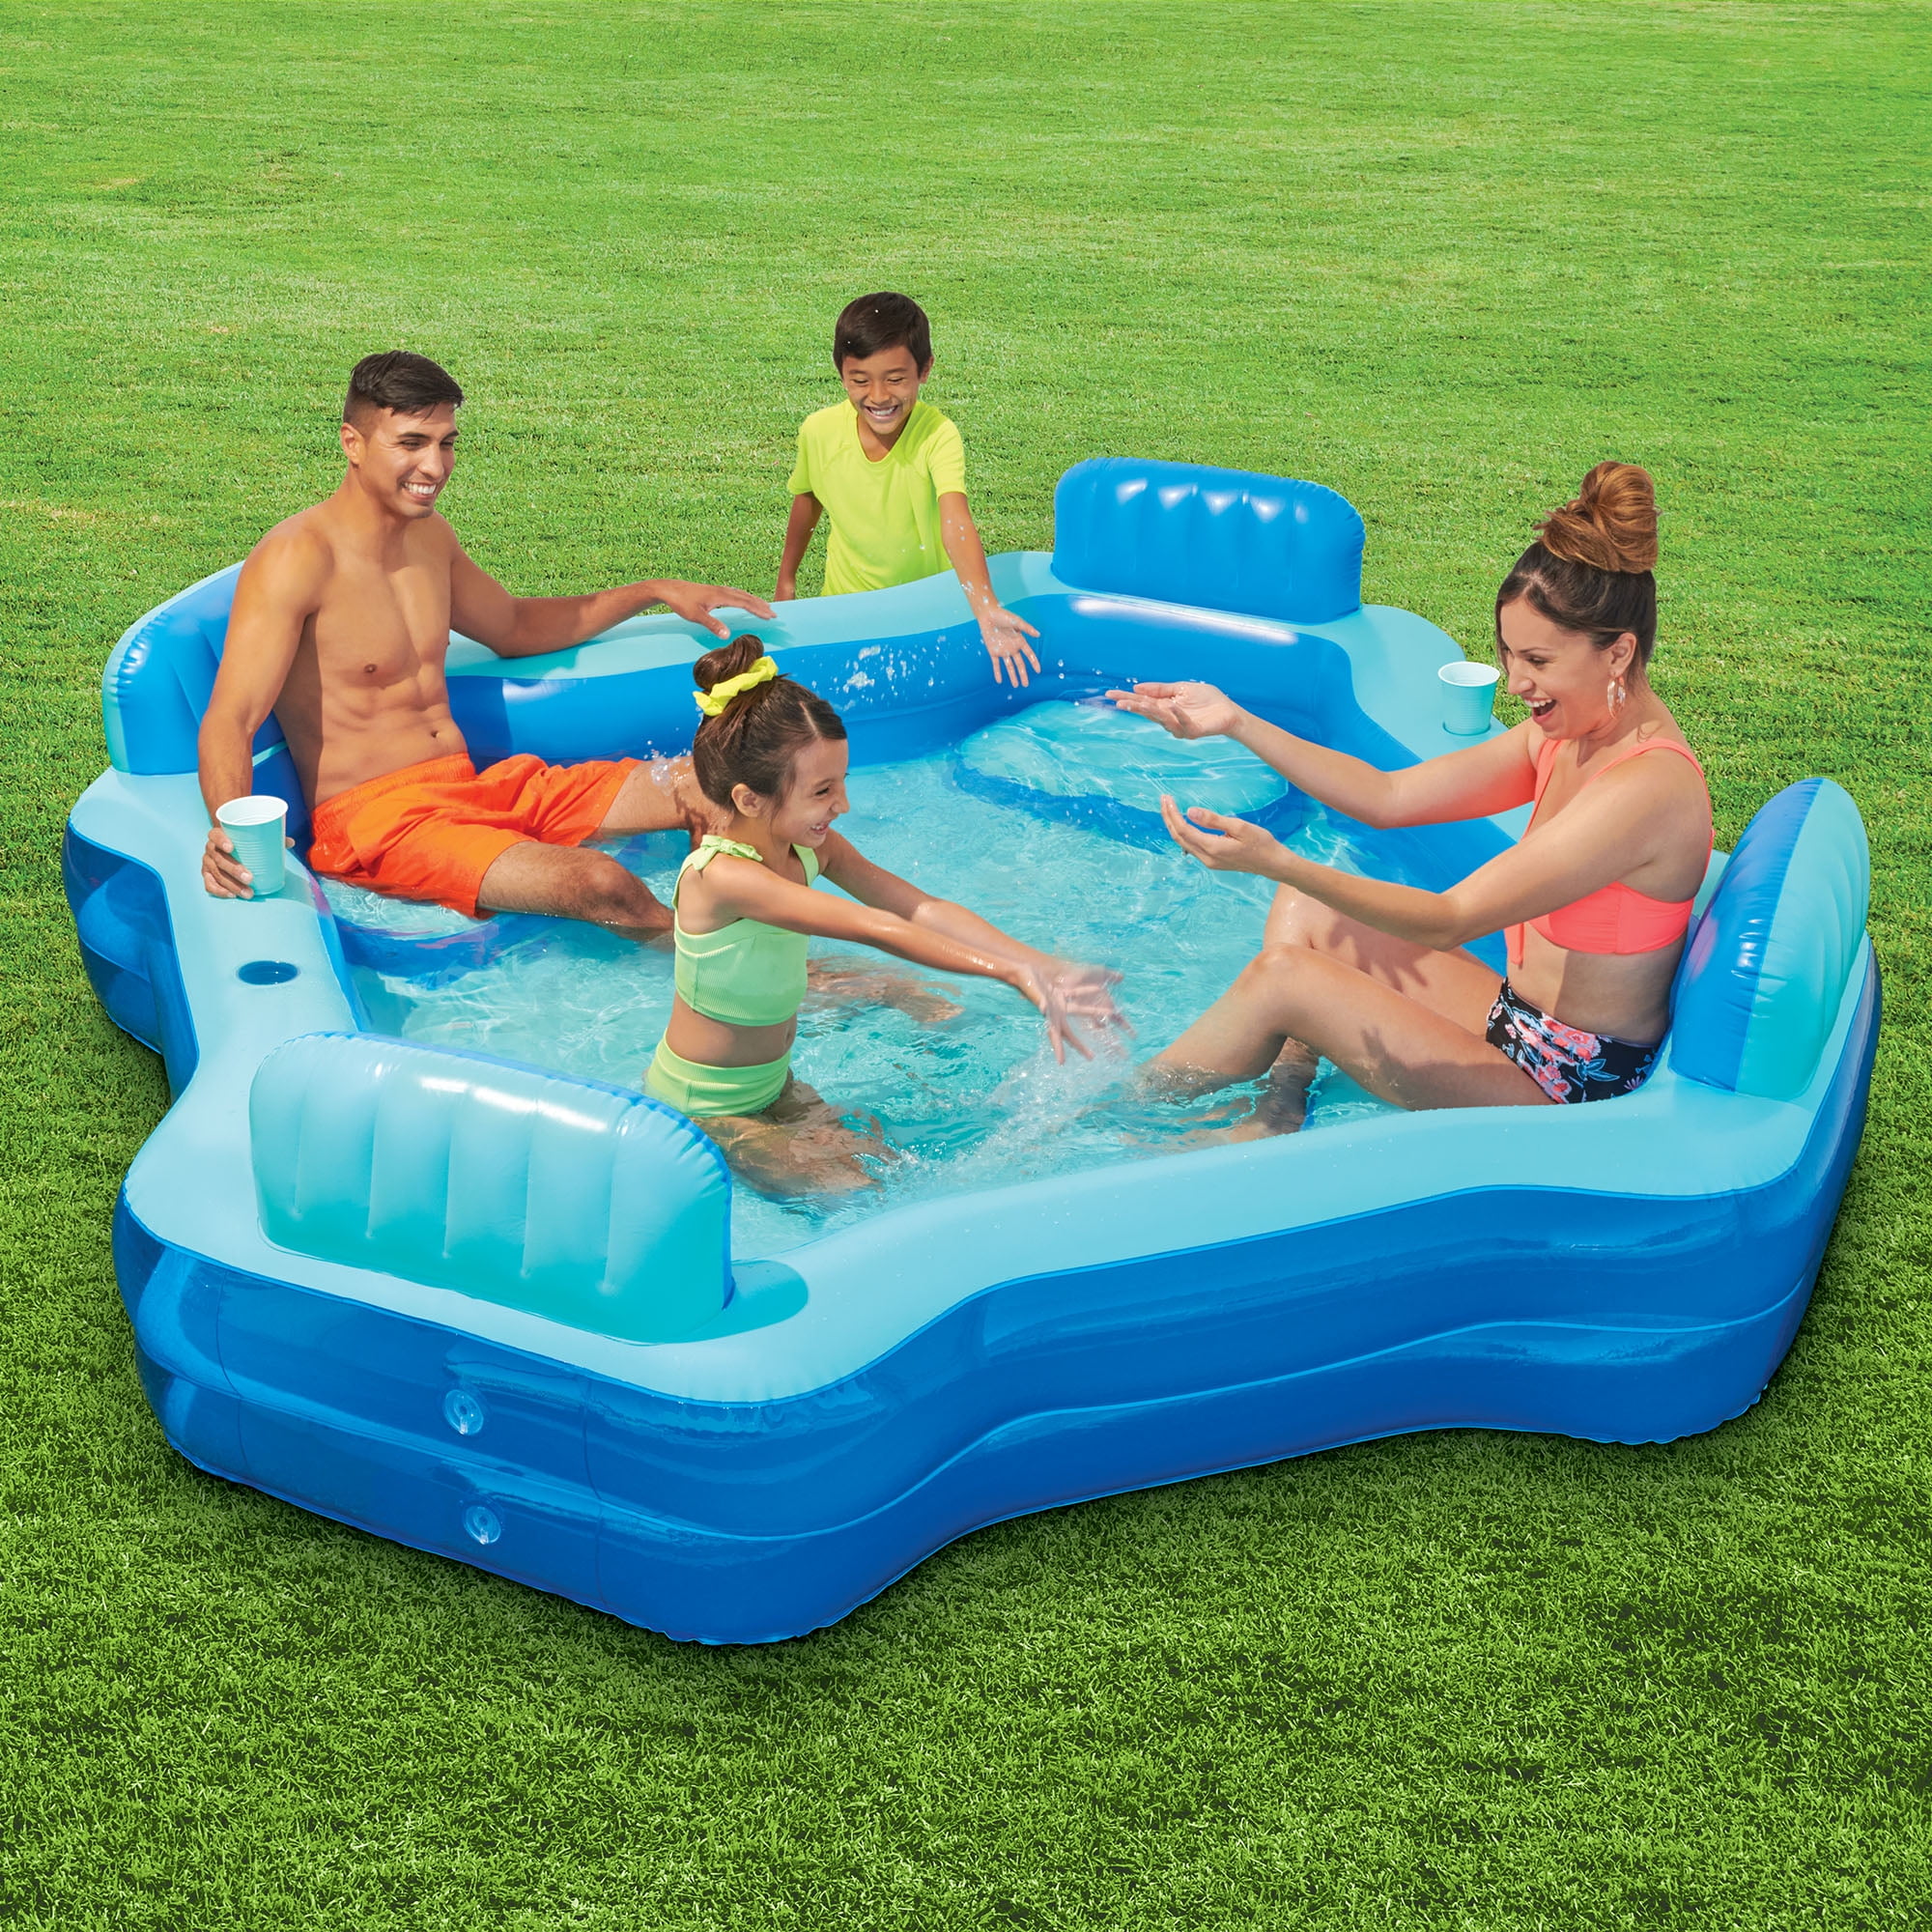 Play Day Square Inflatable Deluxe Comfort Family Pool, Blue, Ages 6 and Up,  Unisex